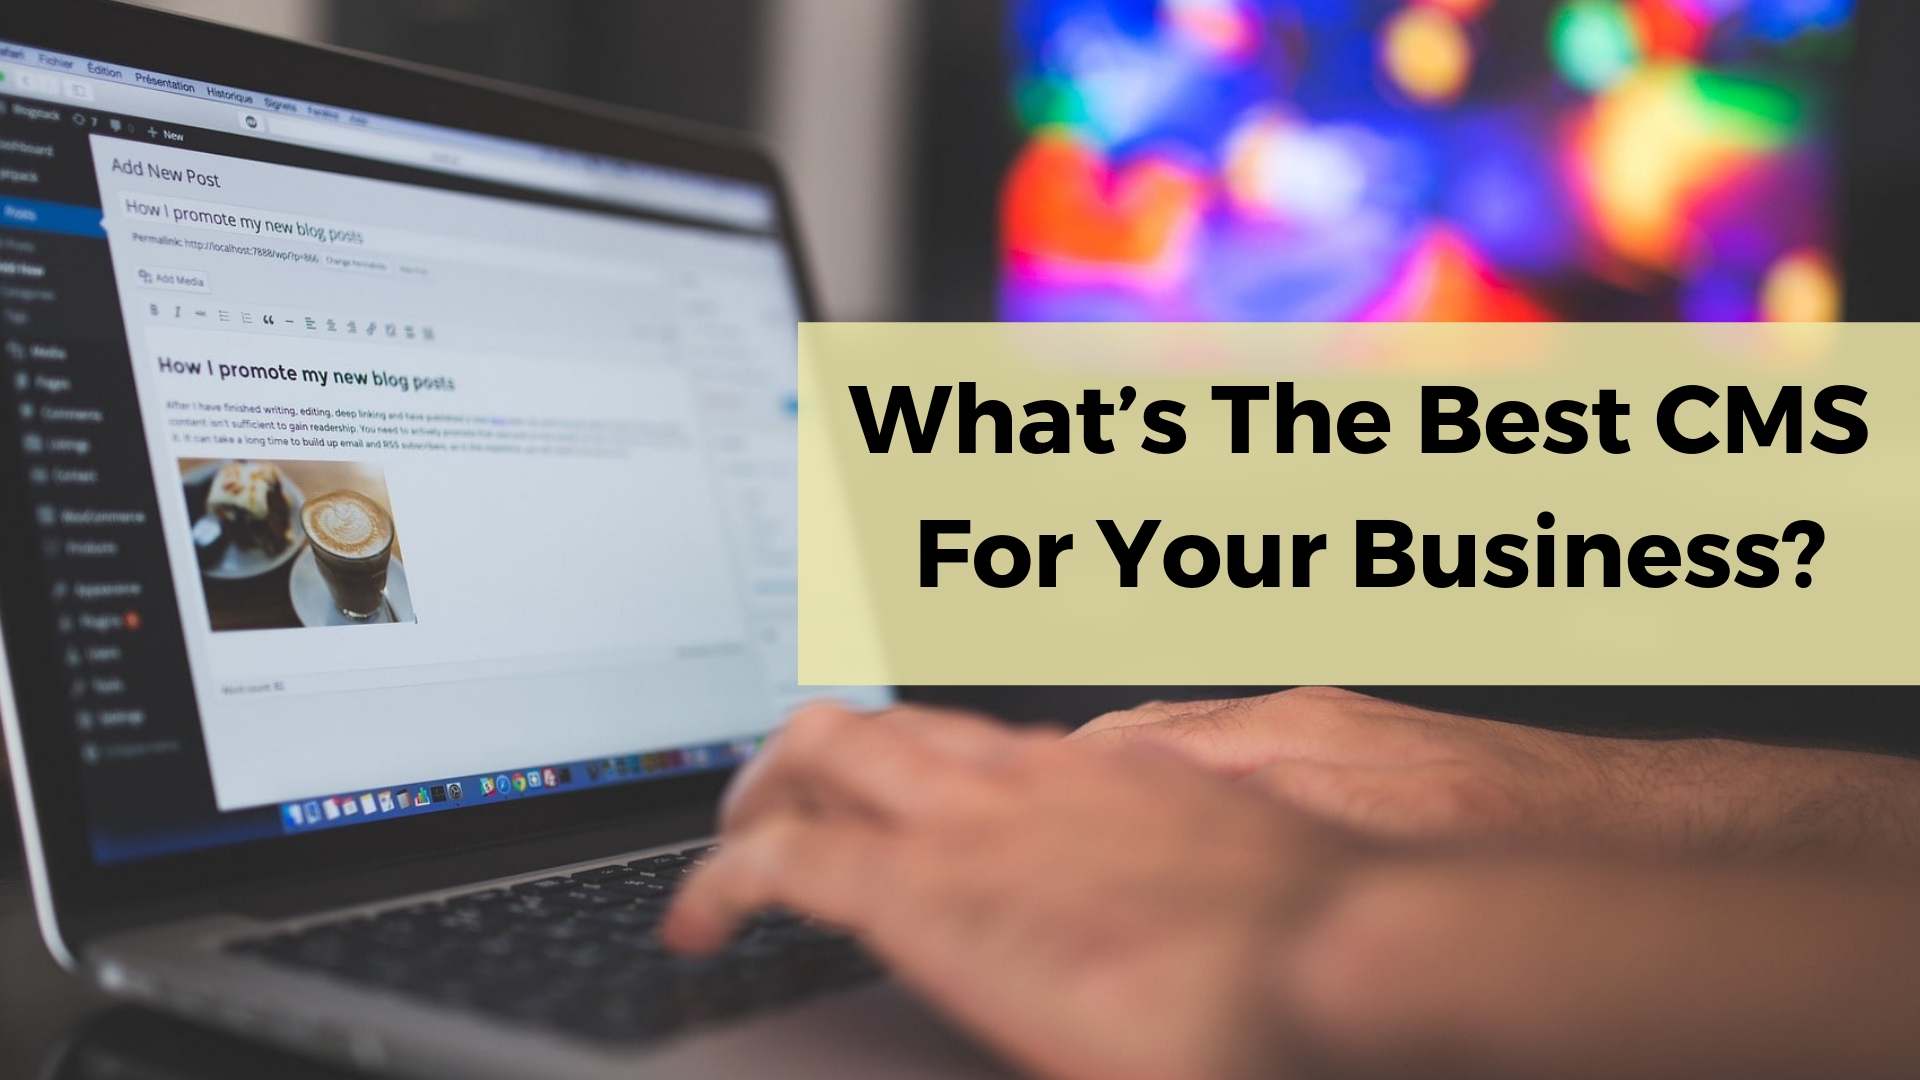 What's The Best CMS For Your Business?